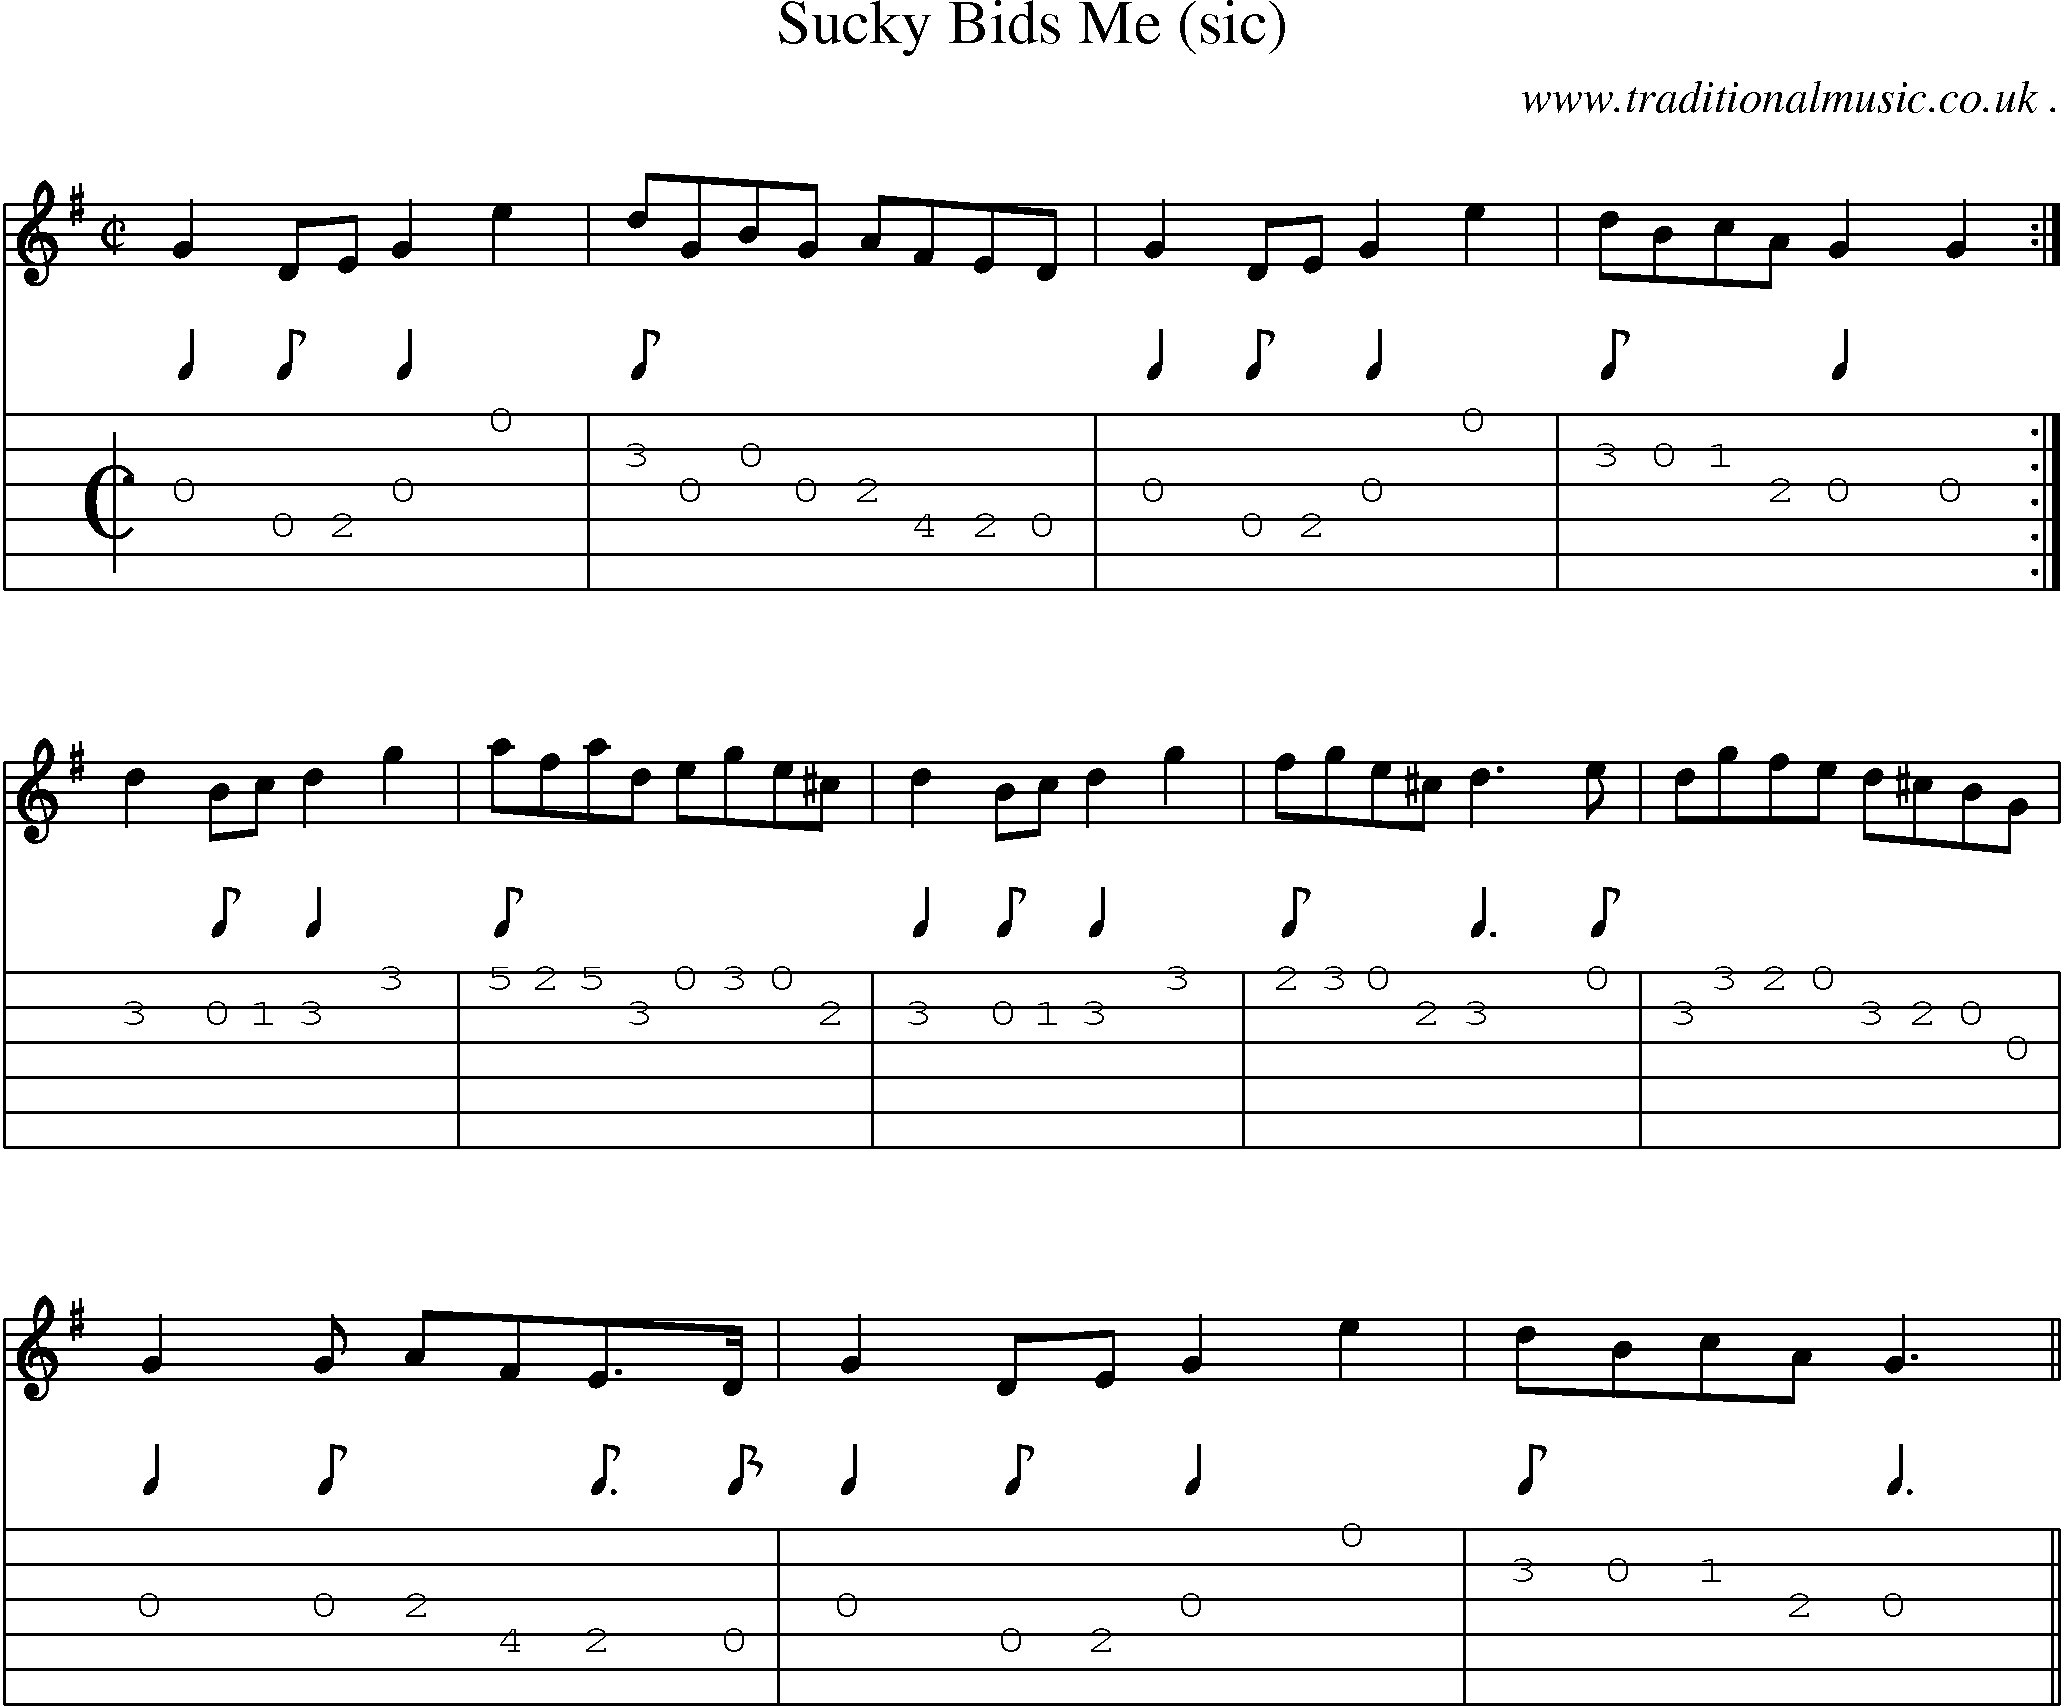 Sheet-music  score, Chords and Guitar Tabs for Sucky Bids Me Sic